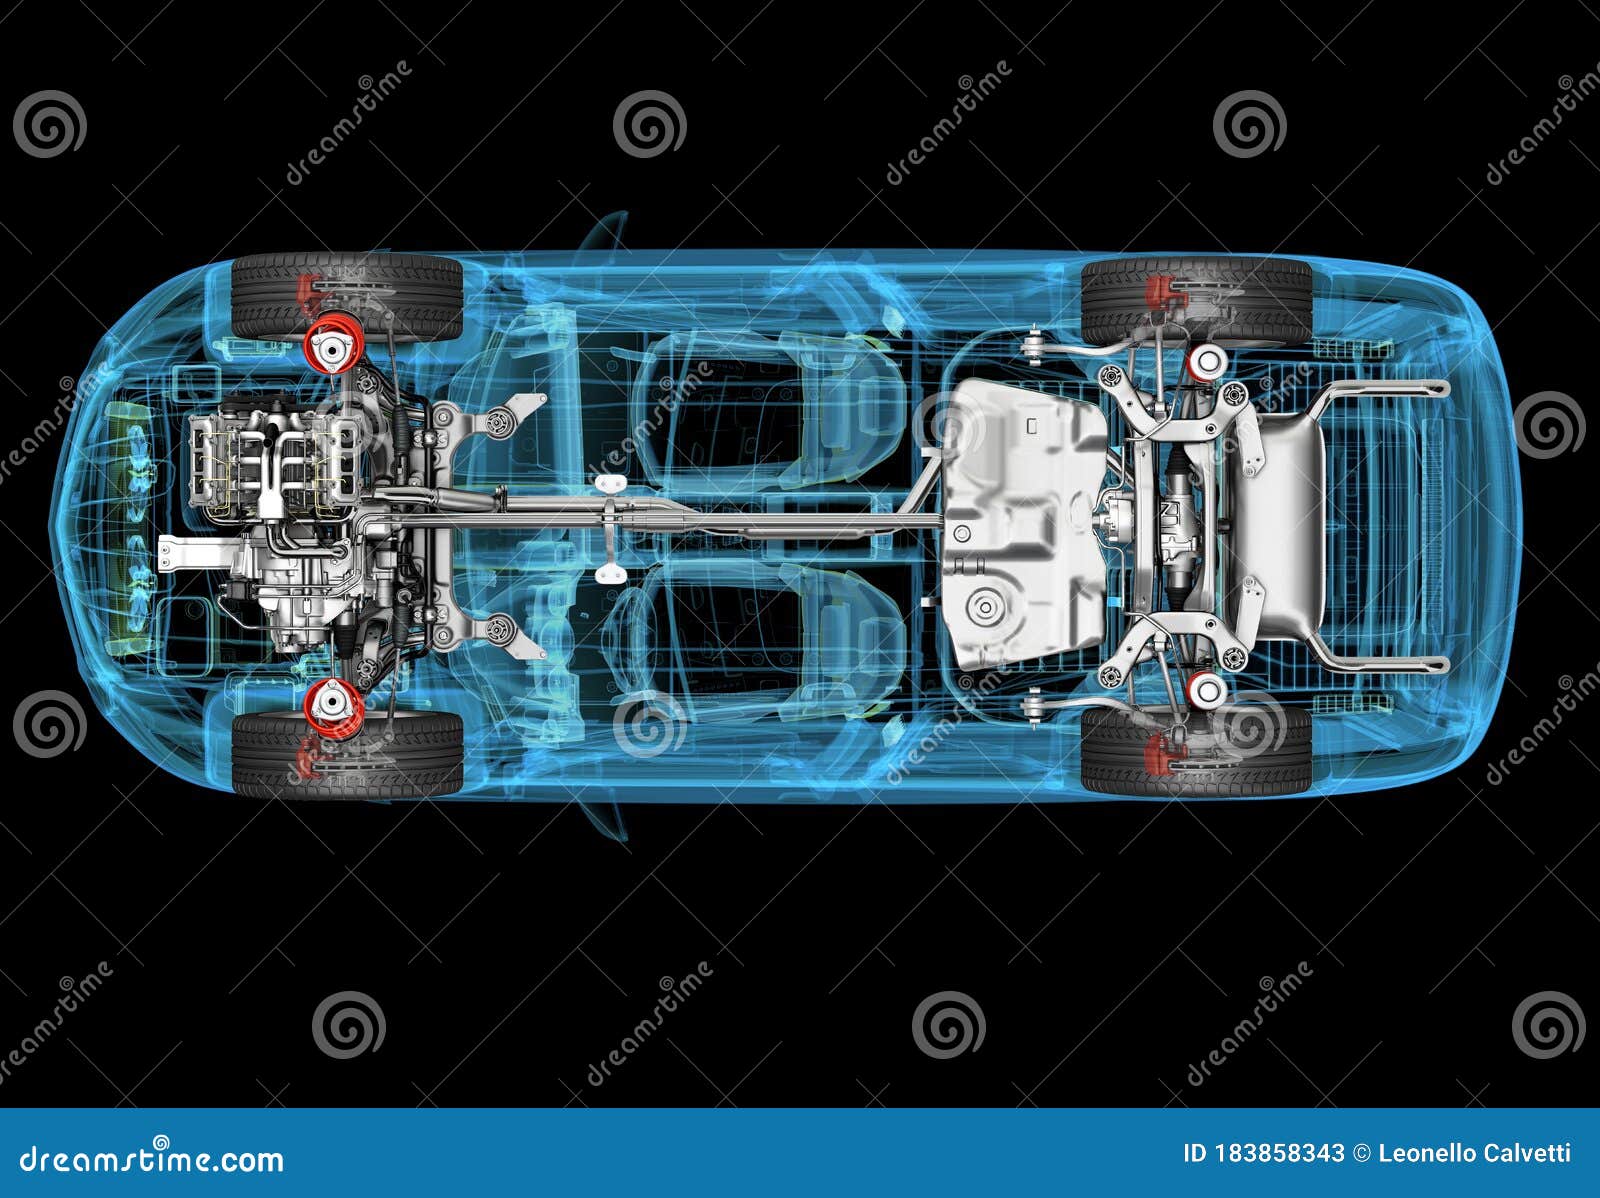 technical 3d  of suv car with x-ray effect and powertrain system